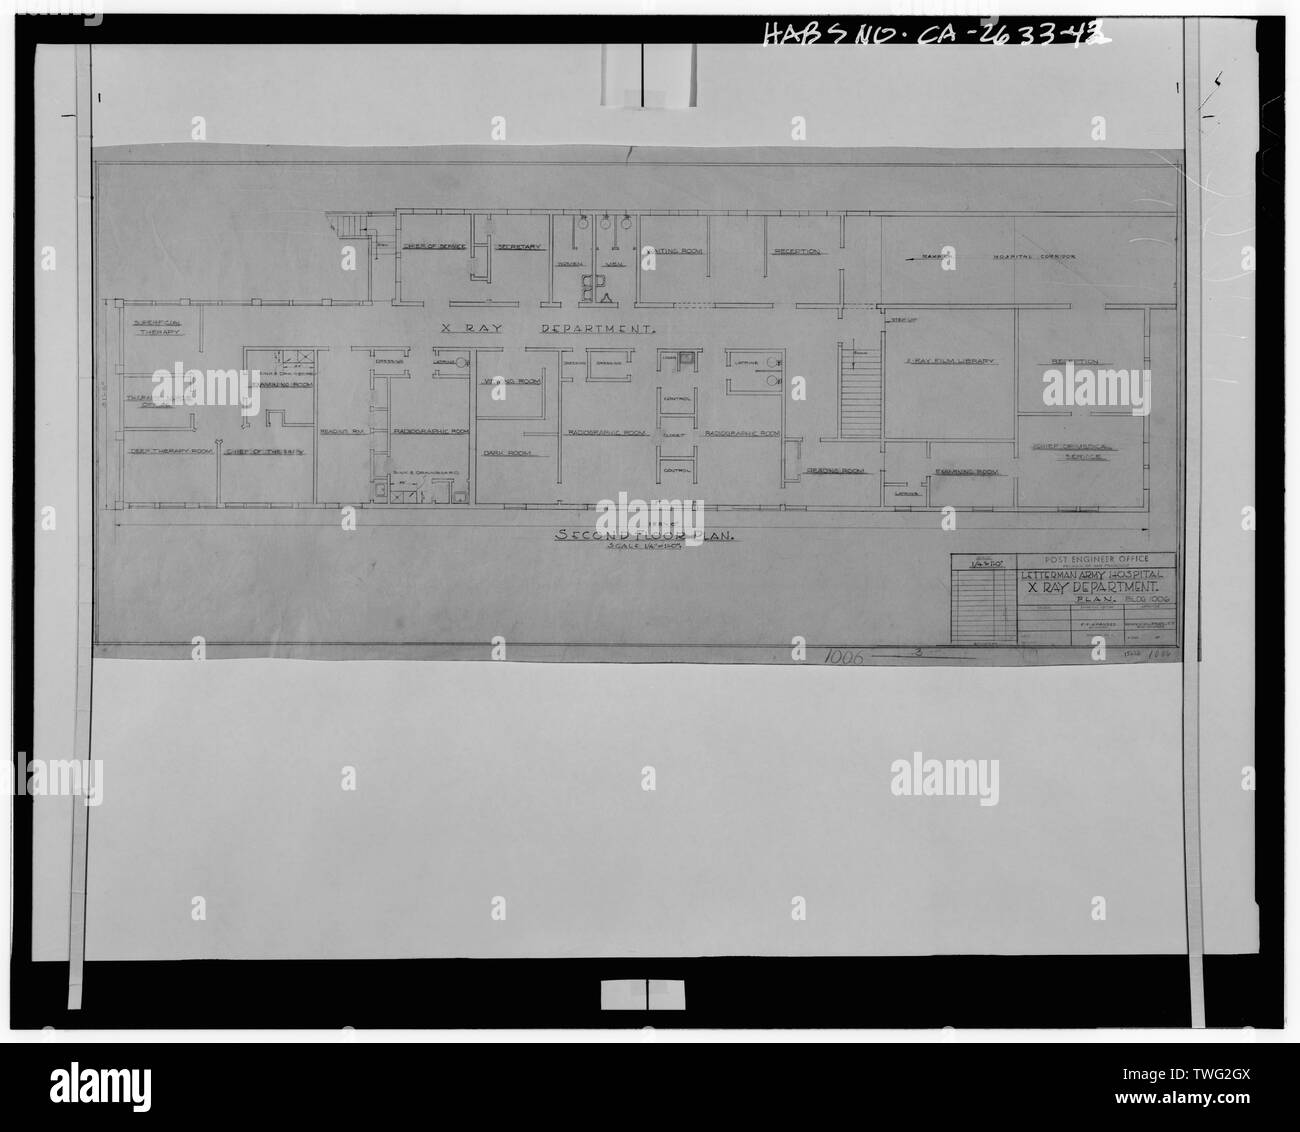 Post Engineer Office, Presidio of San Francisco, Letterman Army Hospital,  X-Ray Department and Second Floor Plan, X-Ray Department Plan, Building  1006. no date. BUILDING 1006. - Presidio of San Francisco, Letterman General